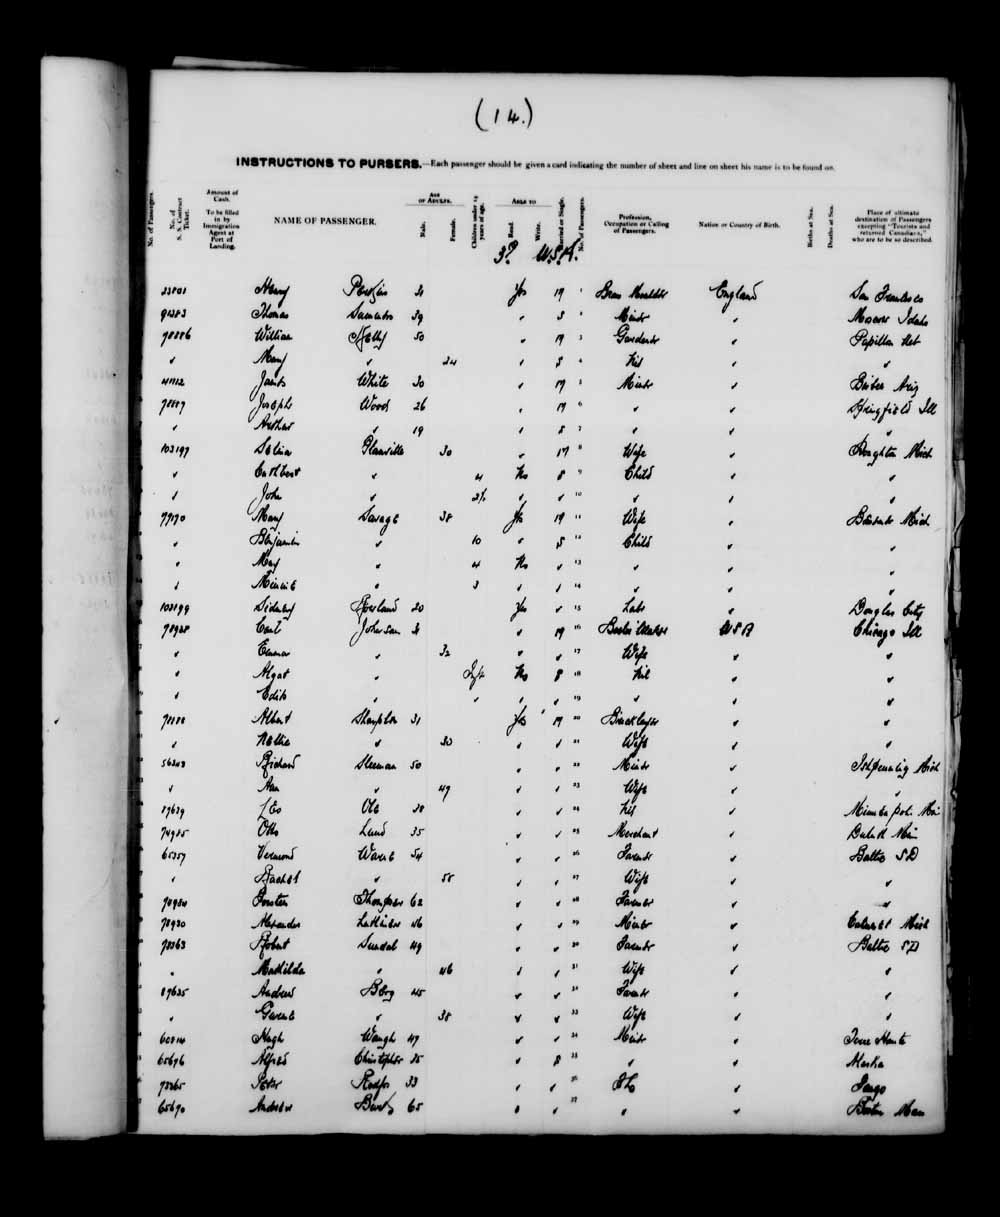 Digitized page of Quebec Passenger Lists for Image No.: e003591264